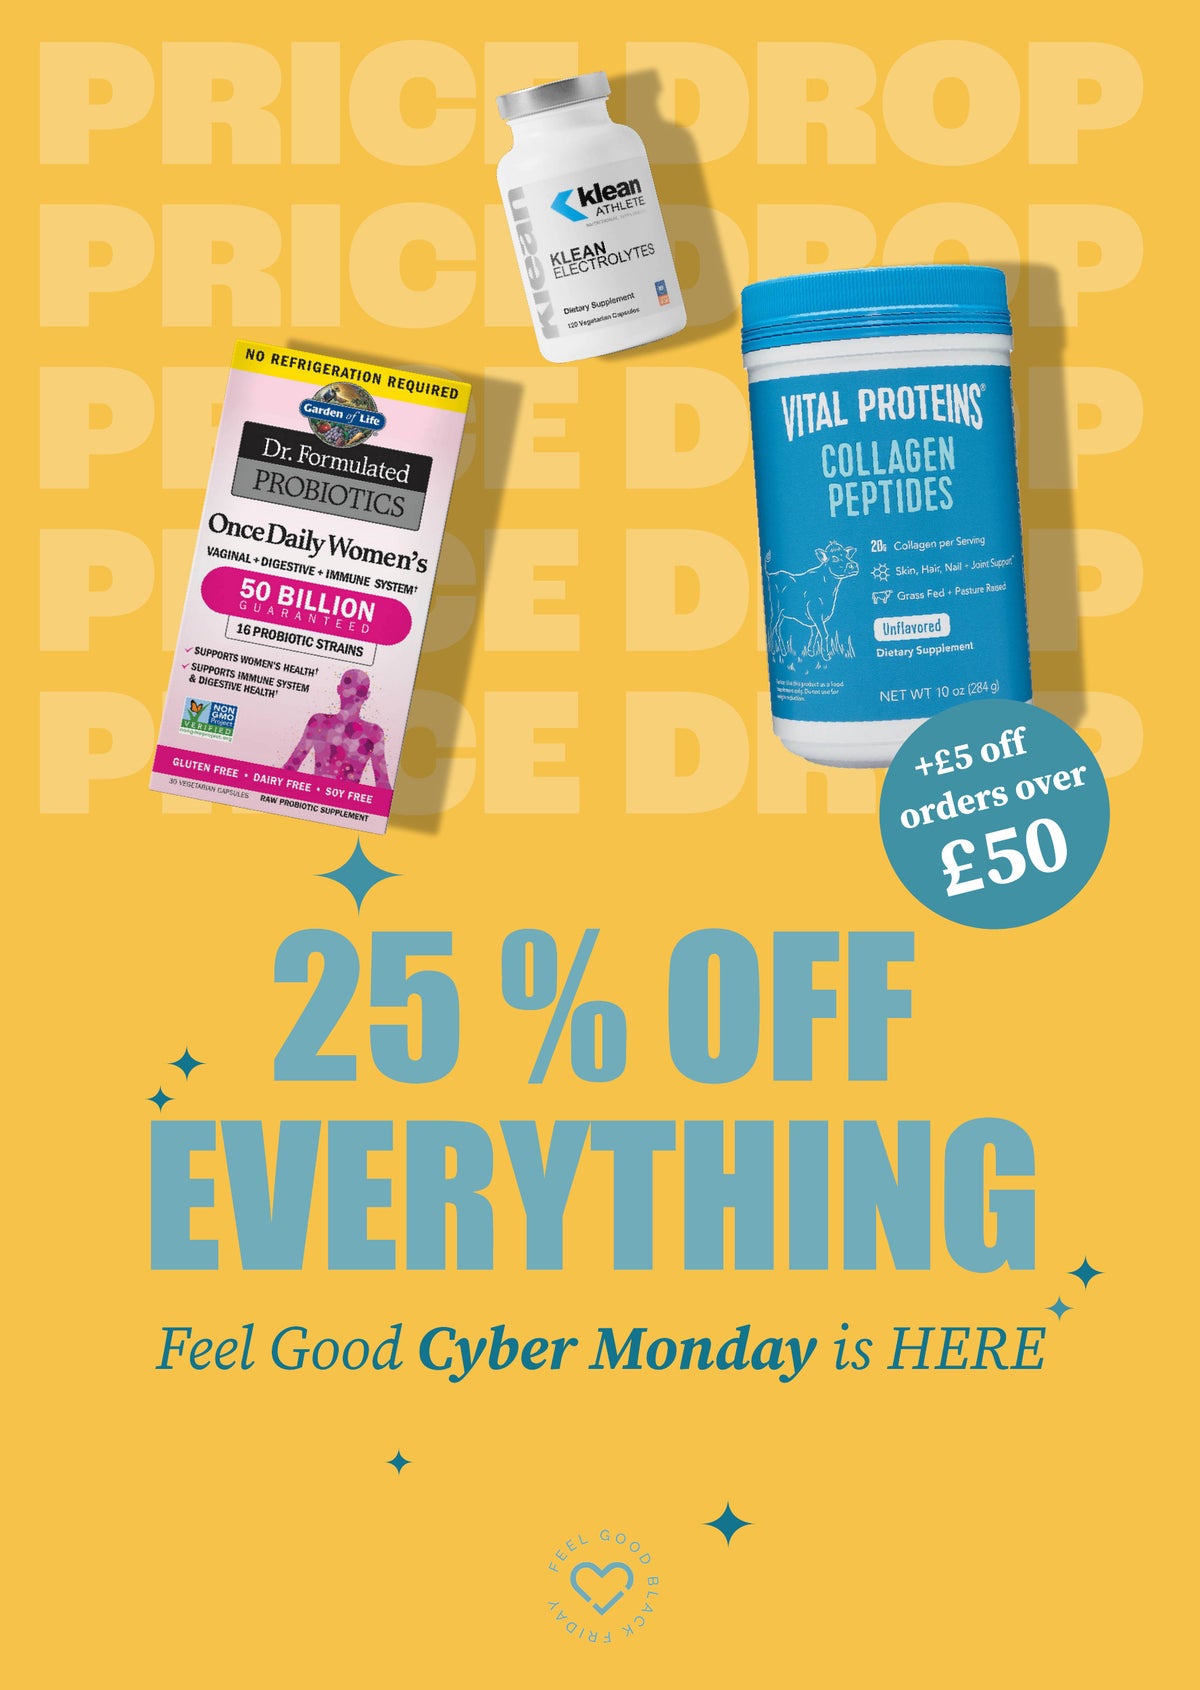 25% OFF EVERYTHING EXTRA £5 OFF ORDERS OVER £60